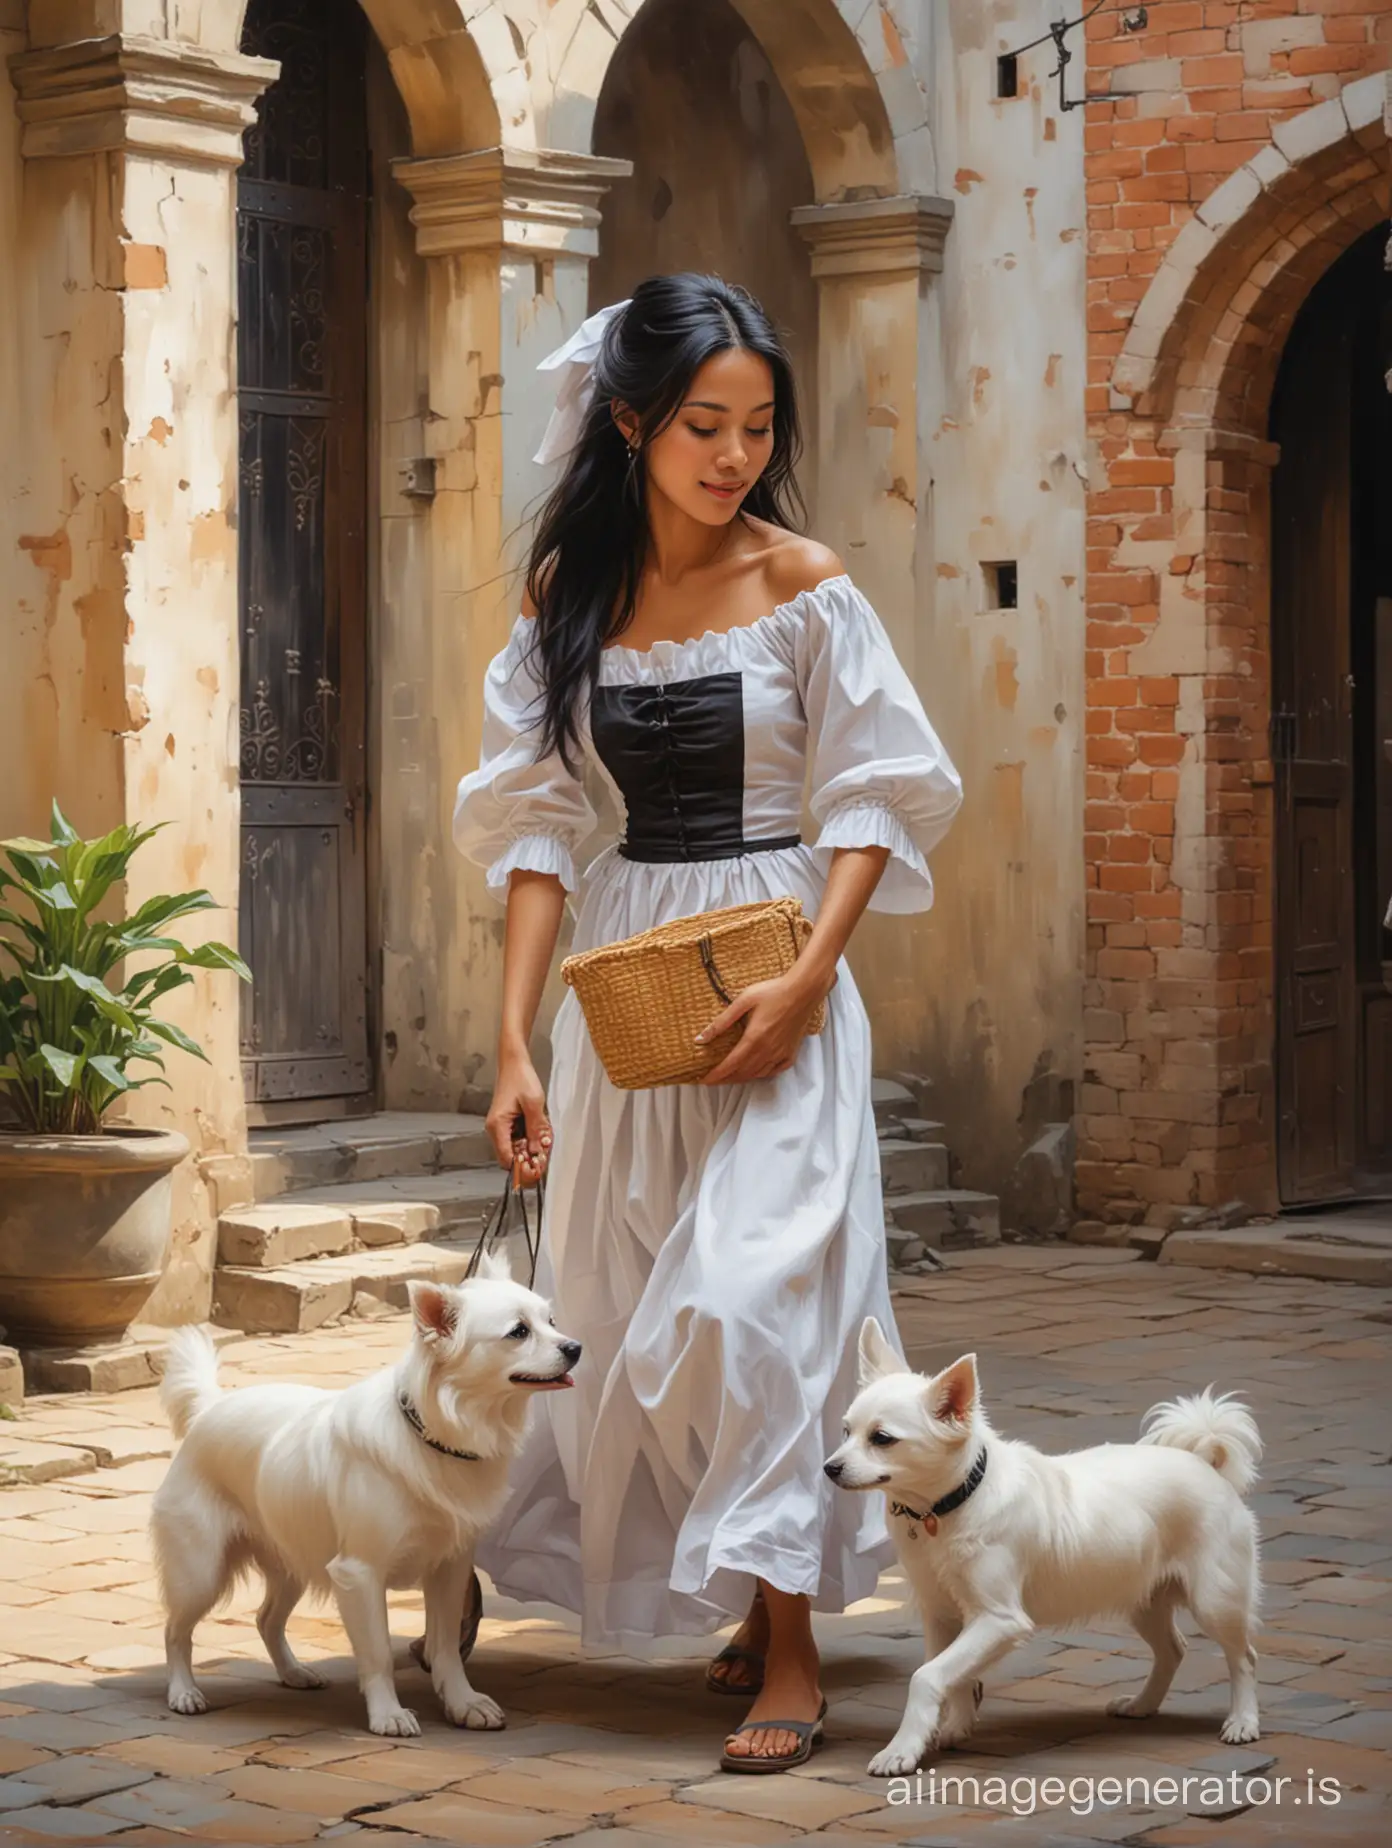 Vietnamese-Maid-Playing-with-Dog-in-Castle-Courtyard